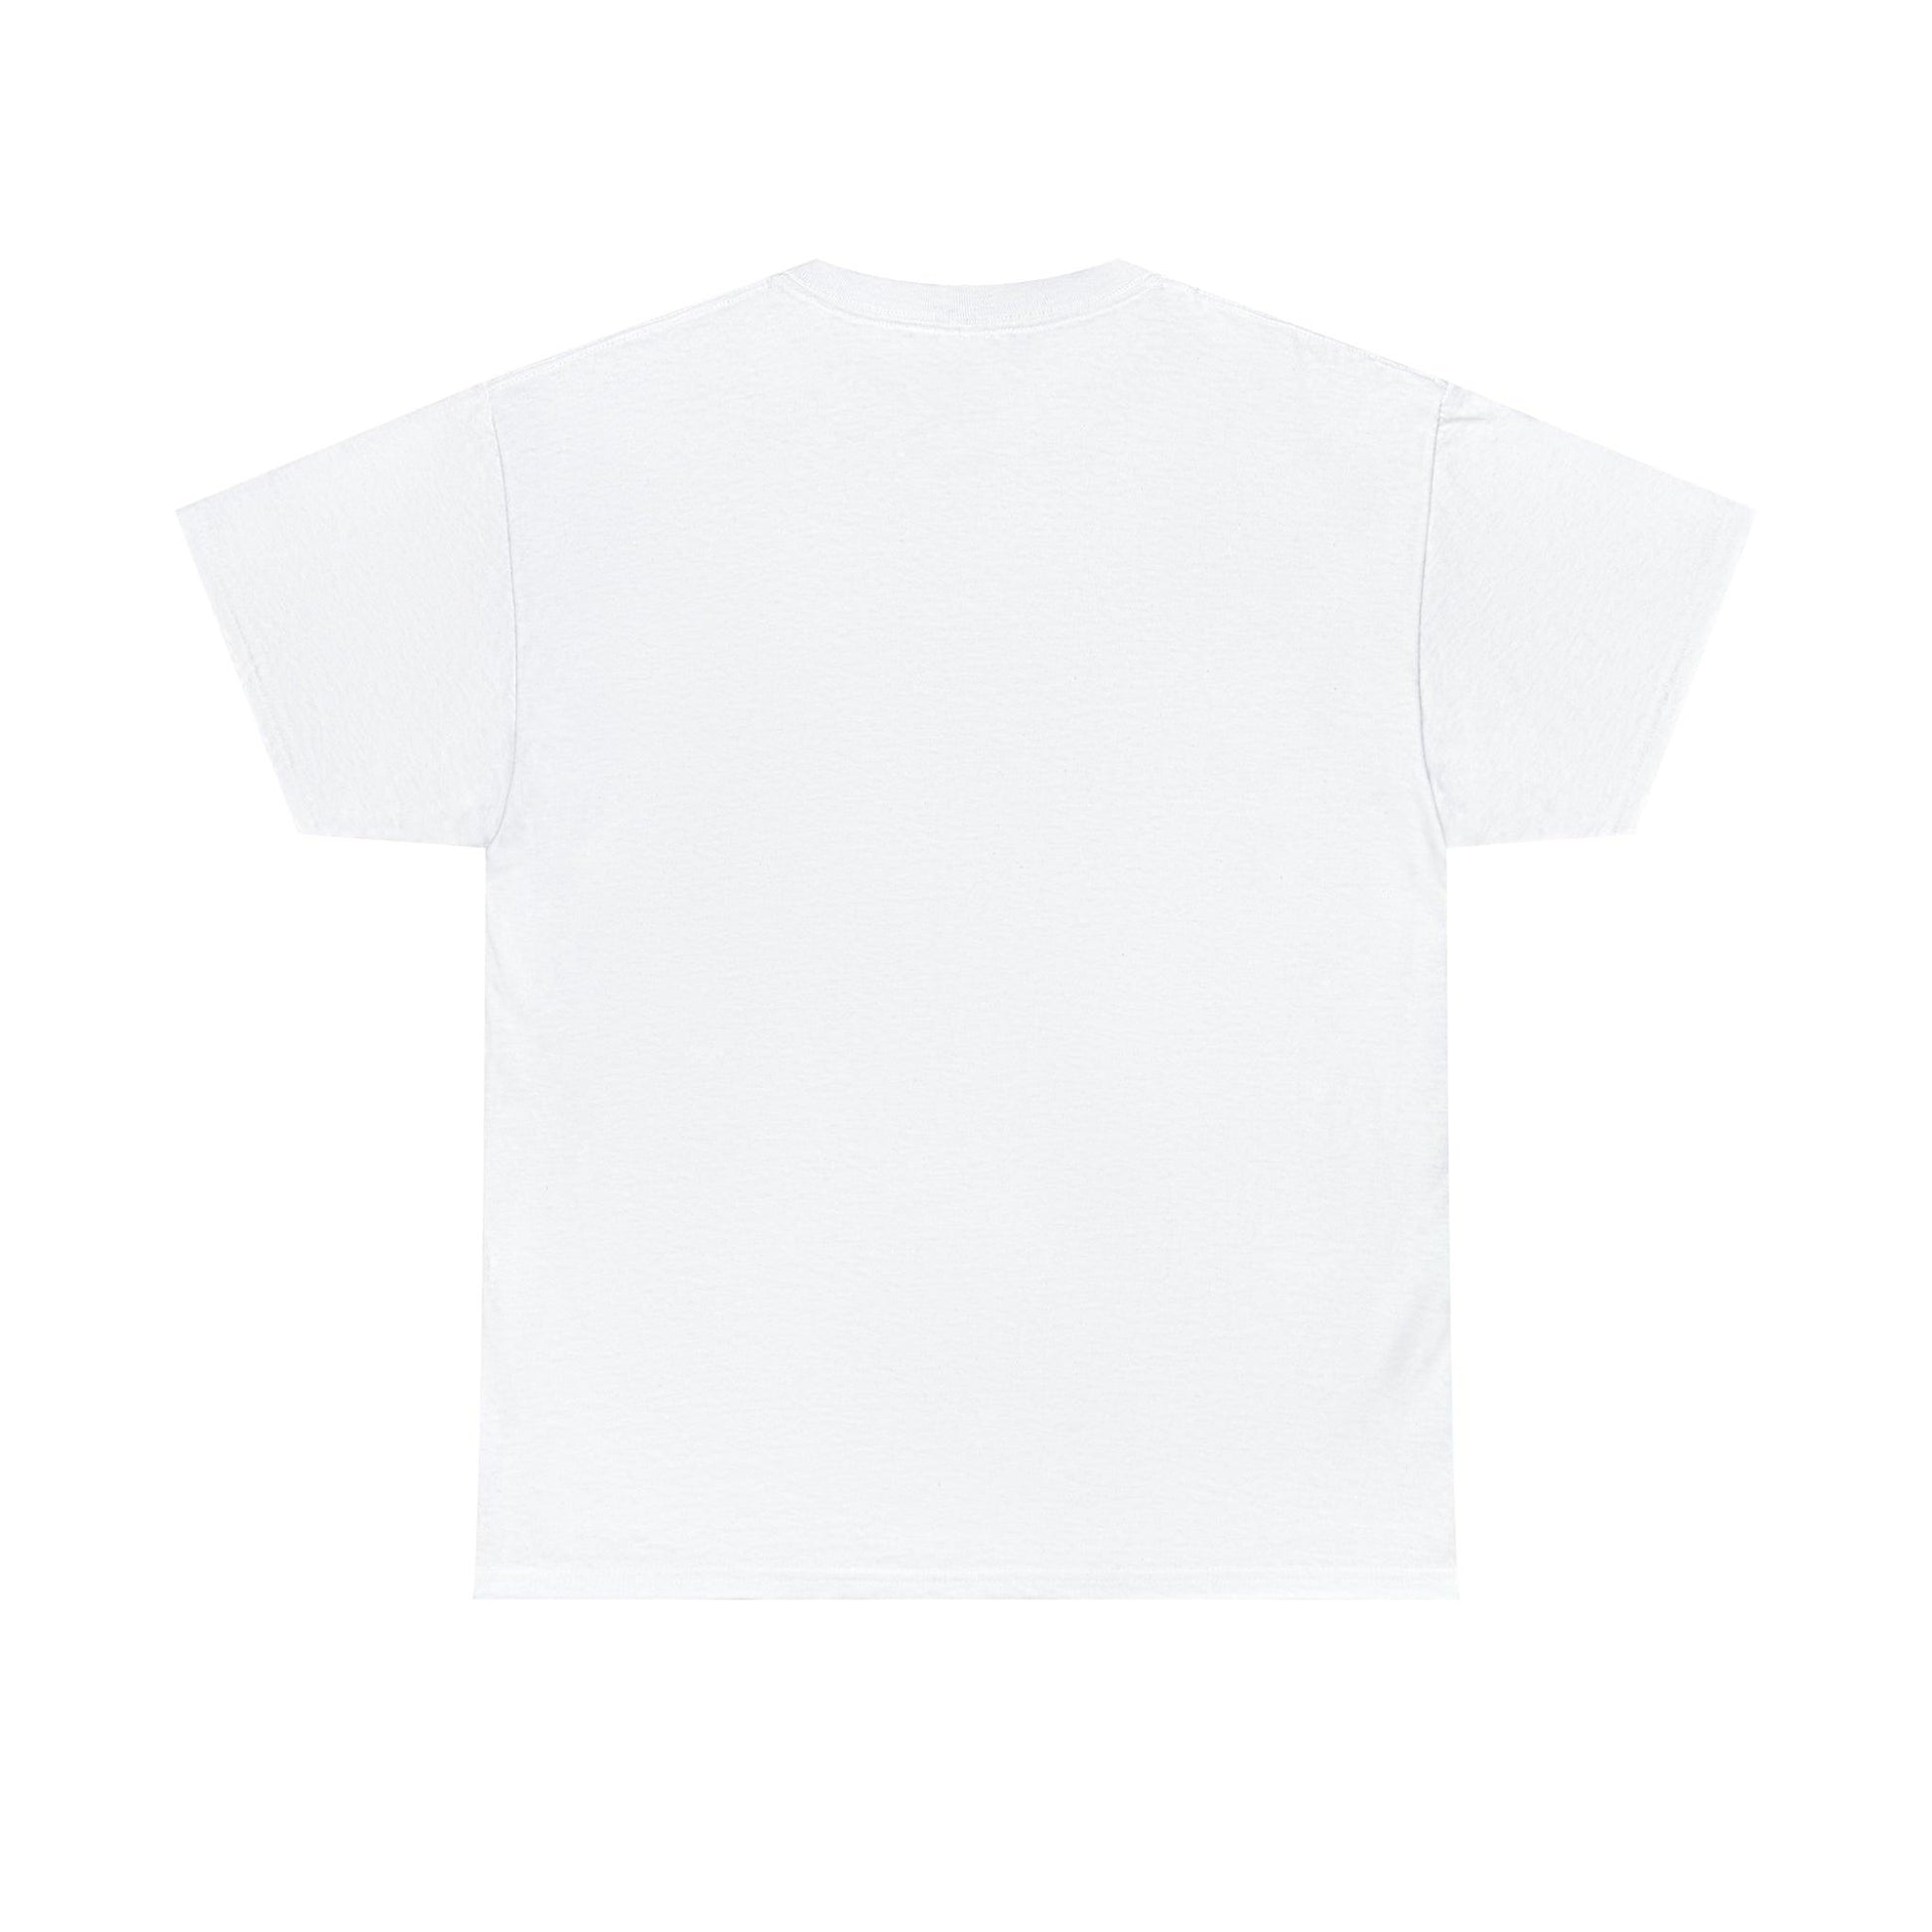 Hat Hair Don’t Care Heavy Cotton TeeThe heavy cotton tee is the basic staple of any wardrobe. It is the foundation upon which casual fashion grows. All it needs is a personalized design to elevate thinCare Heavy Cotton TeeThe Hufeisen-Ranch (WYO Wagyu)T-Shirt